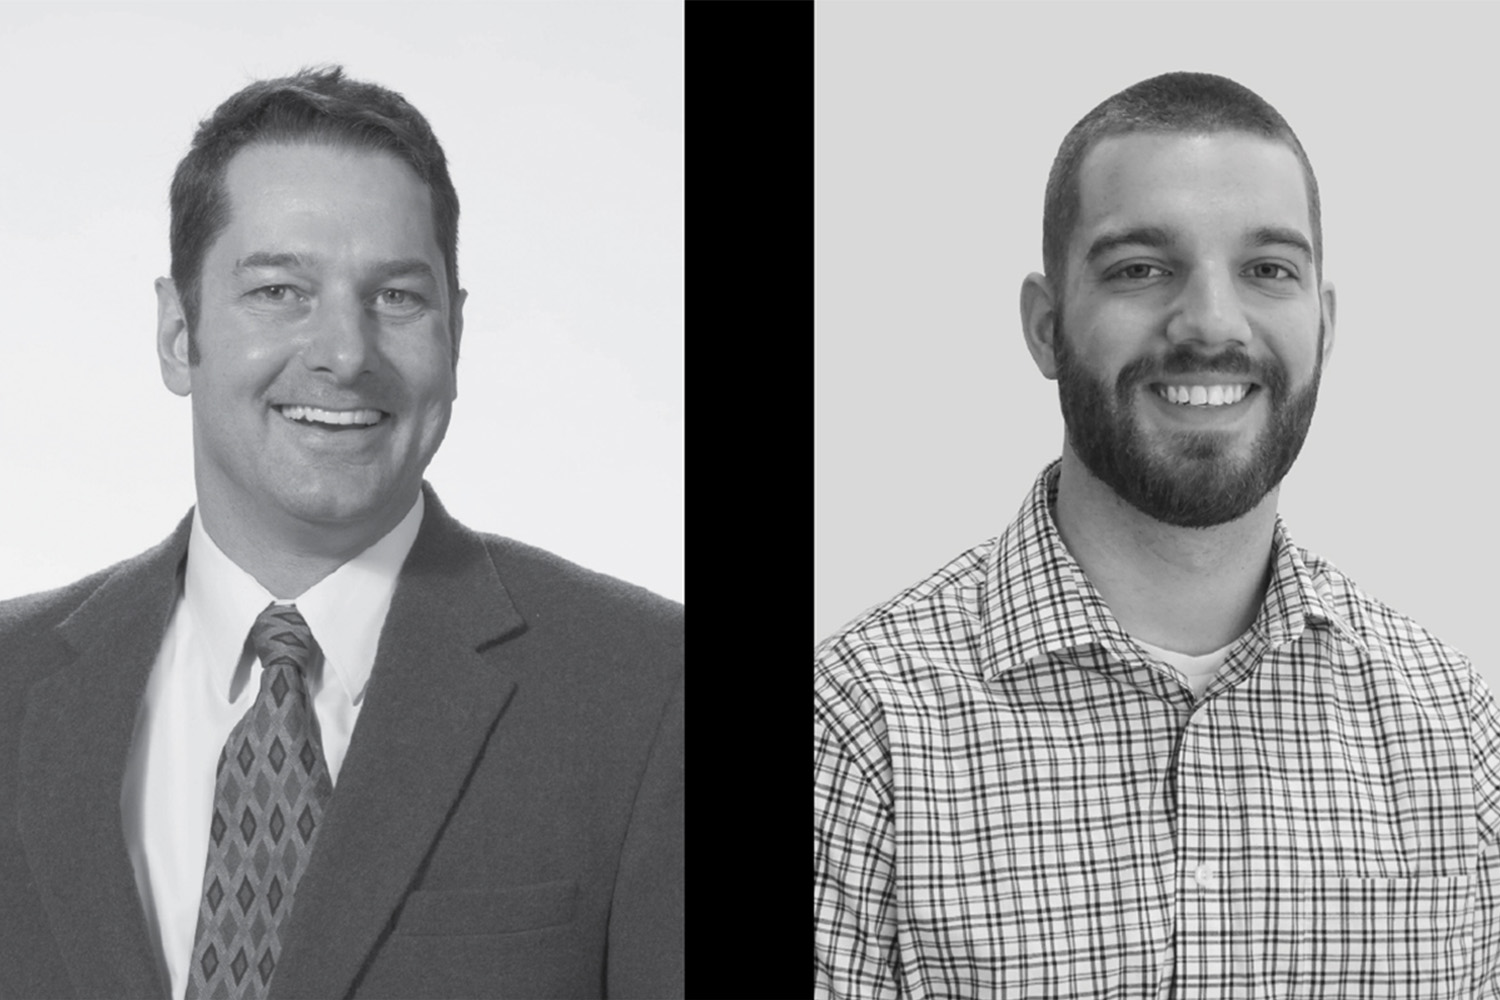 TOCCI's promoted team members, VJ Tocci and Dan Arenz